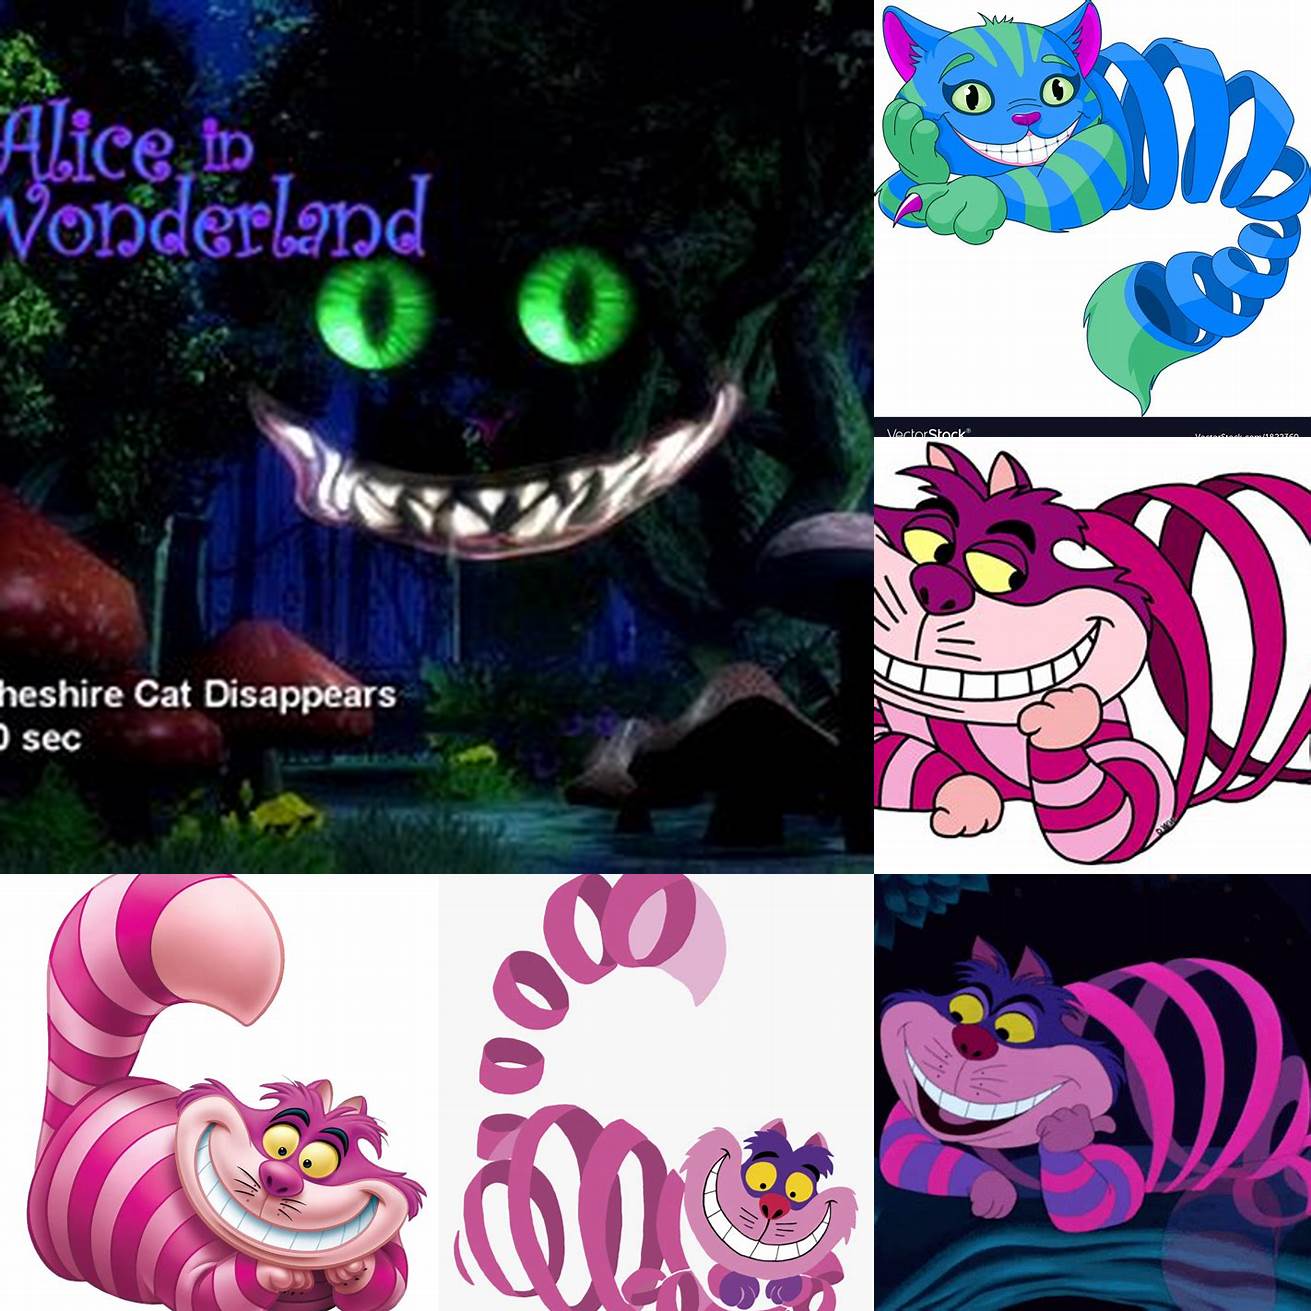 The Cheshire Cats Disappearing Act